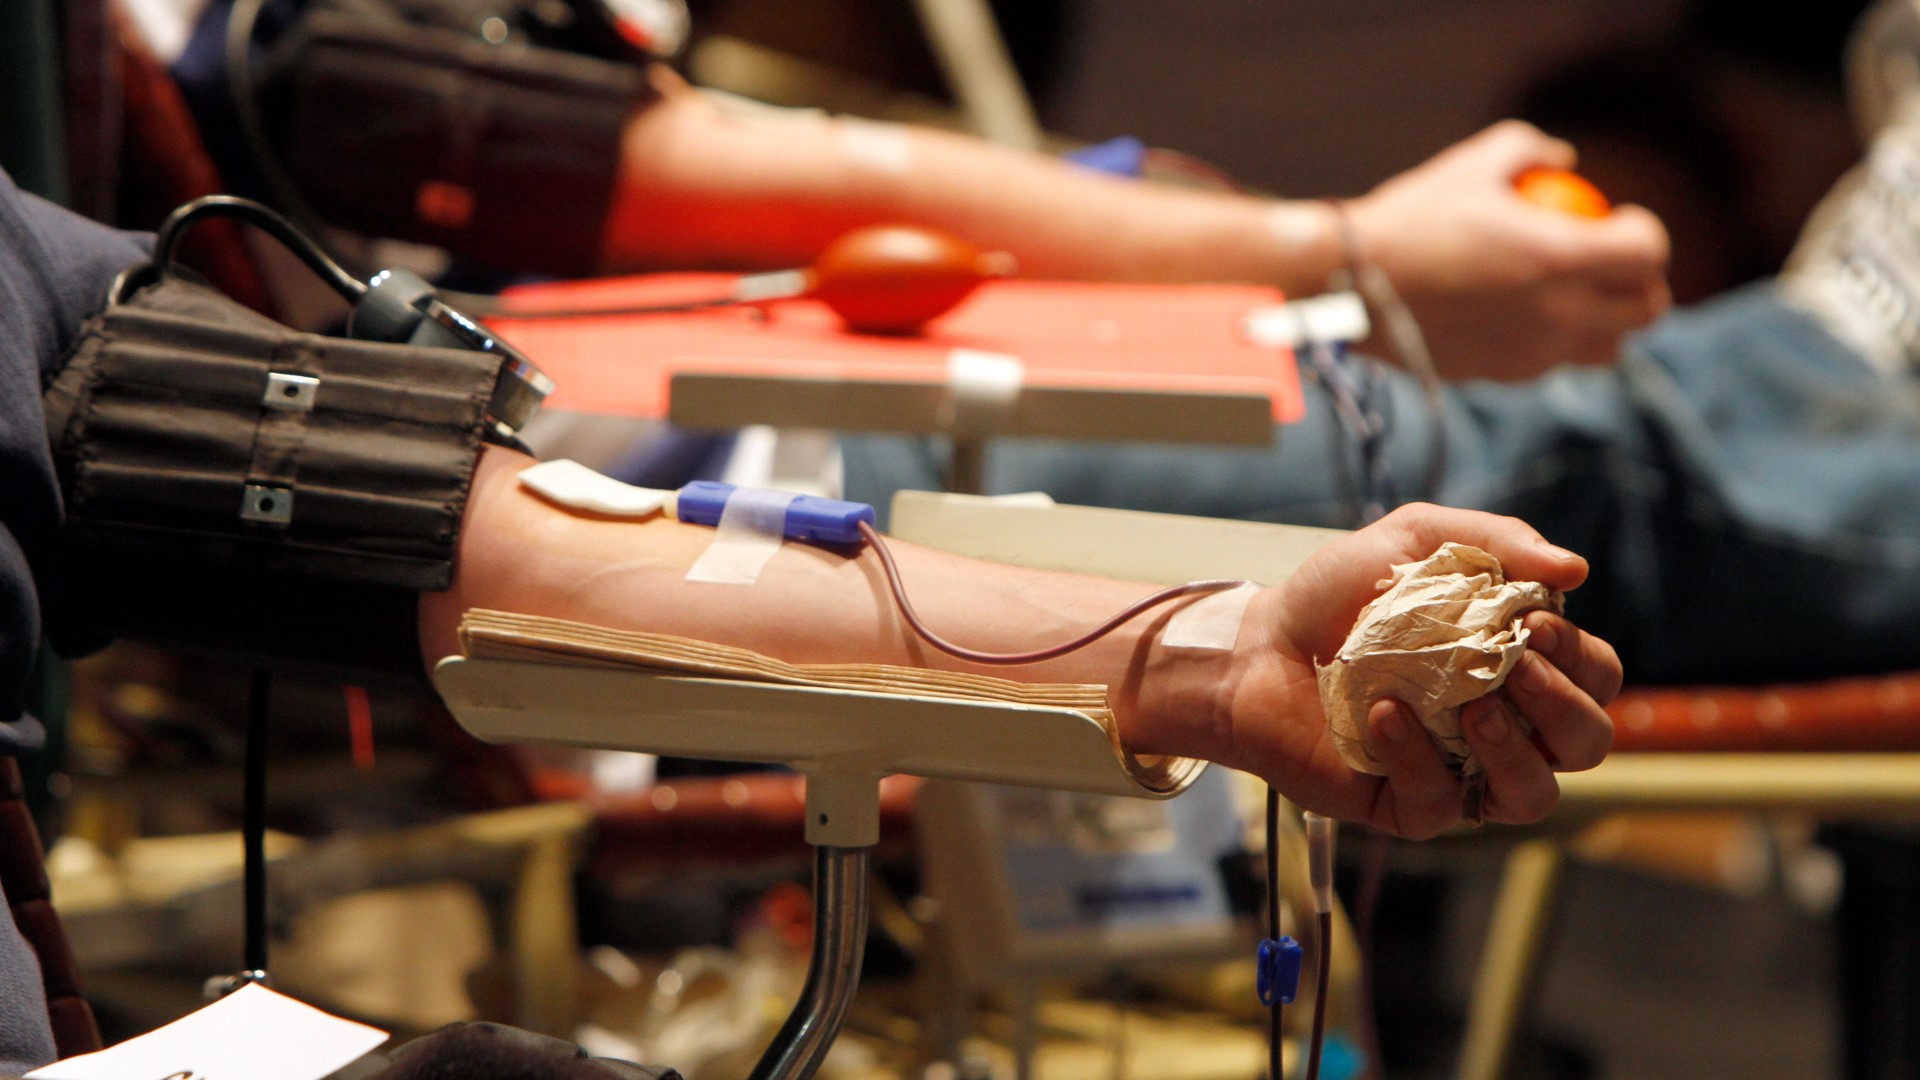 The ADVANCE Study aims to evaluate alternatives to the blood donor deferral policy for gay and bisexual men.